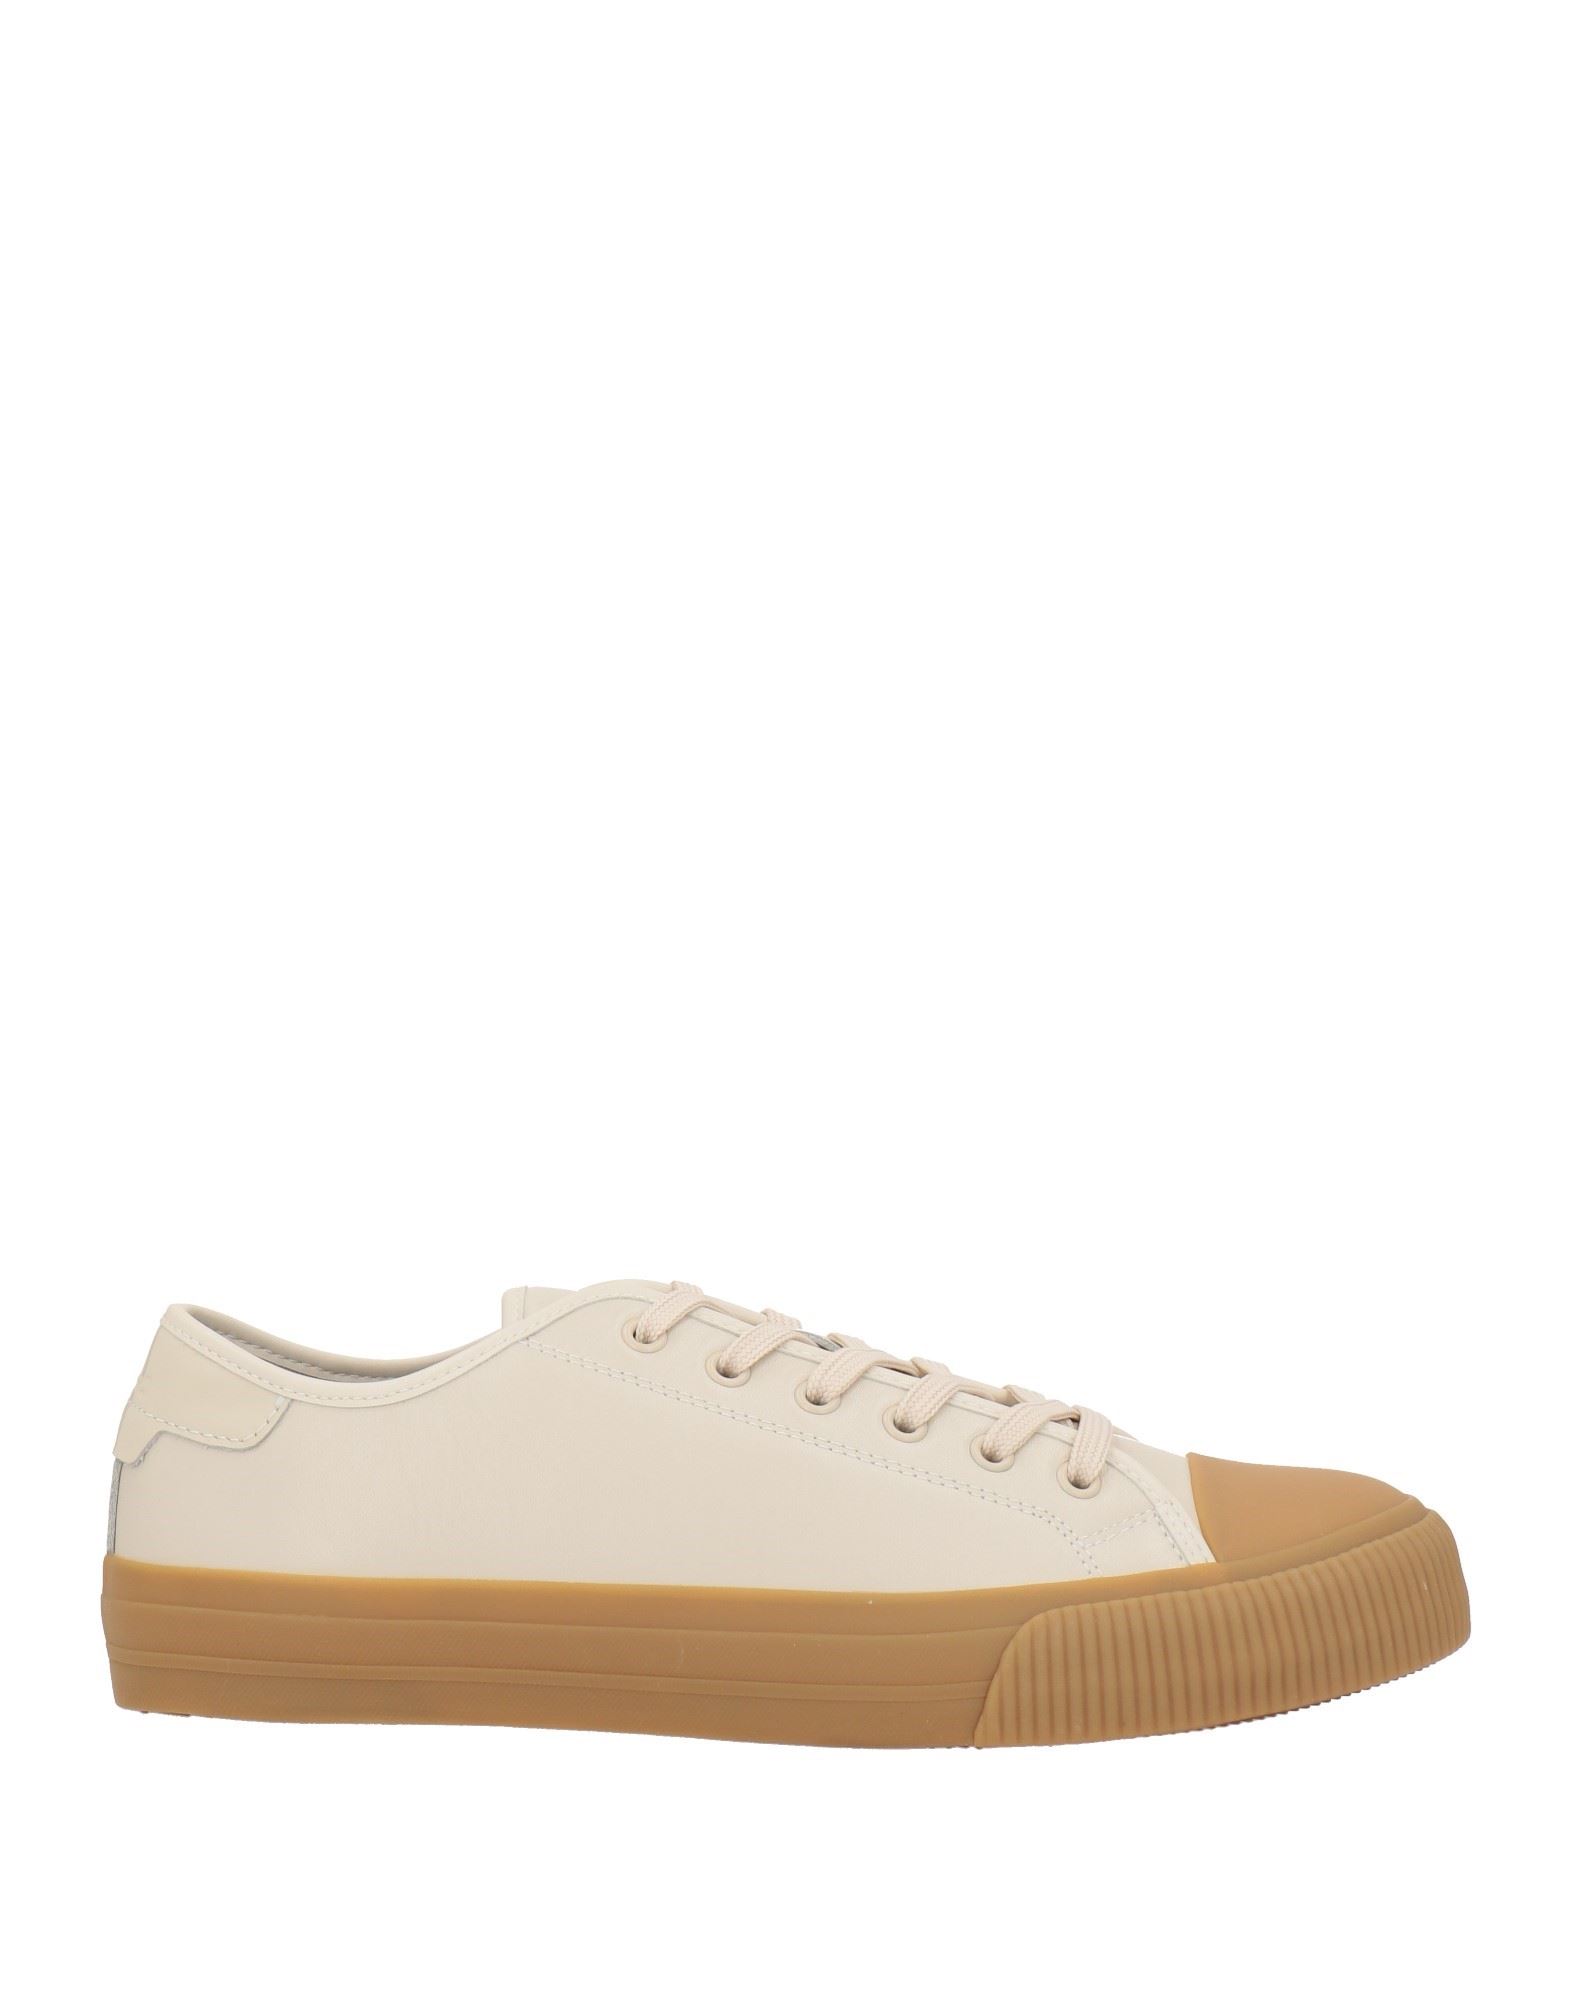 Shop Sandro Man Sneakers Off White Size 9 Soft Leather